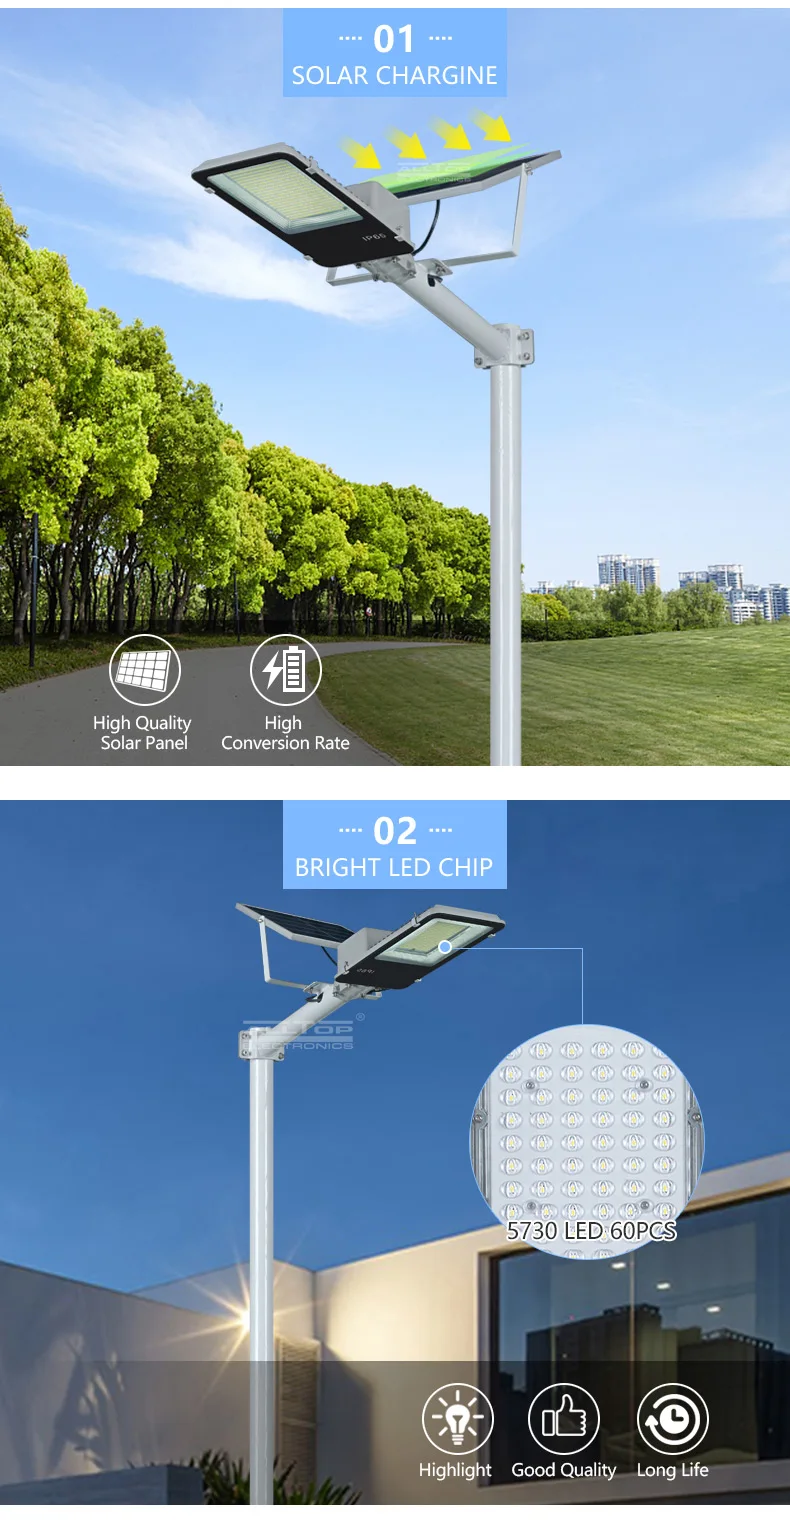 ALLTOP High performance ip65 waterproof remote control 200w integrated LED Solar Street Light